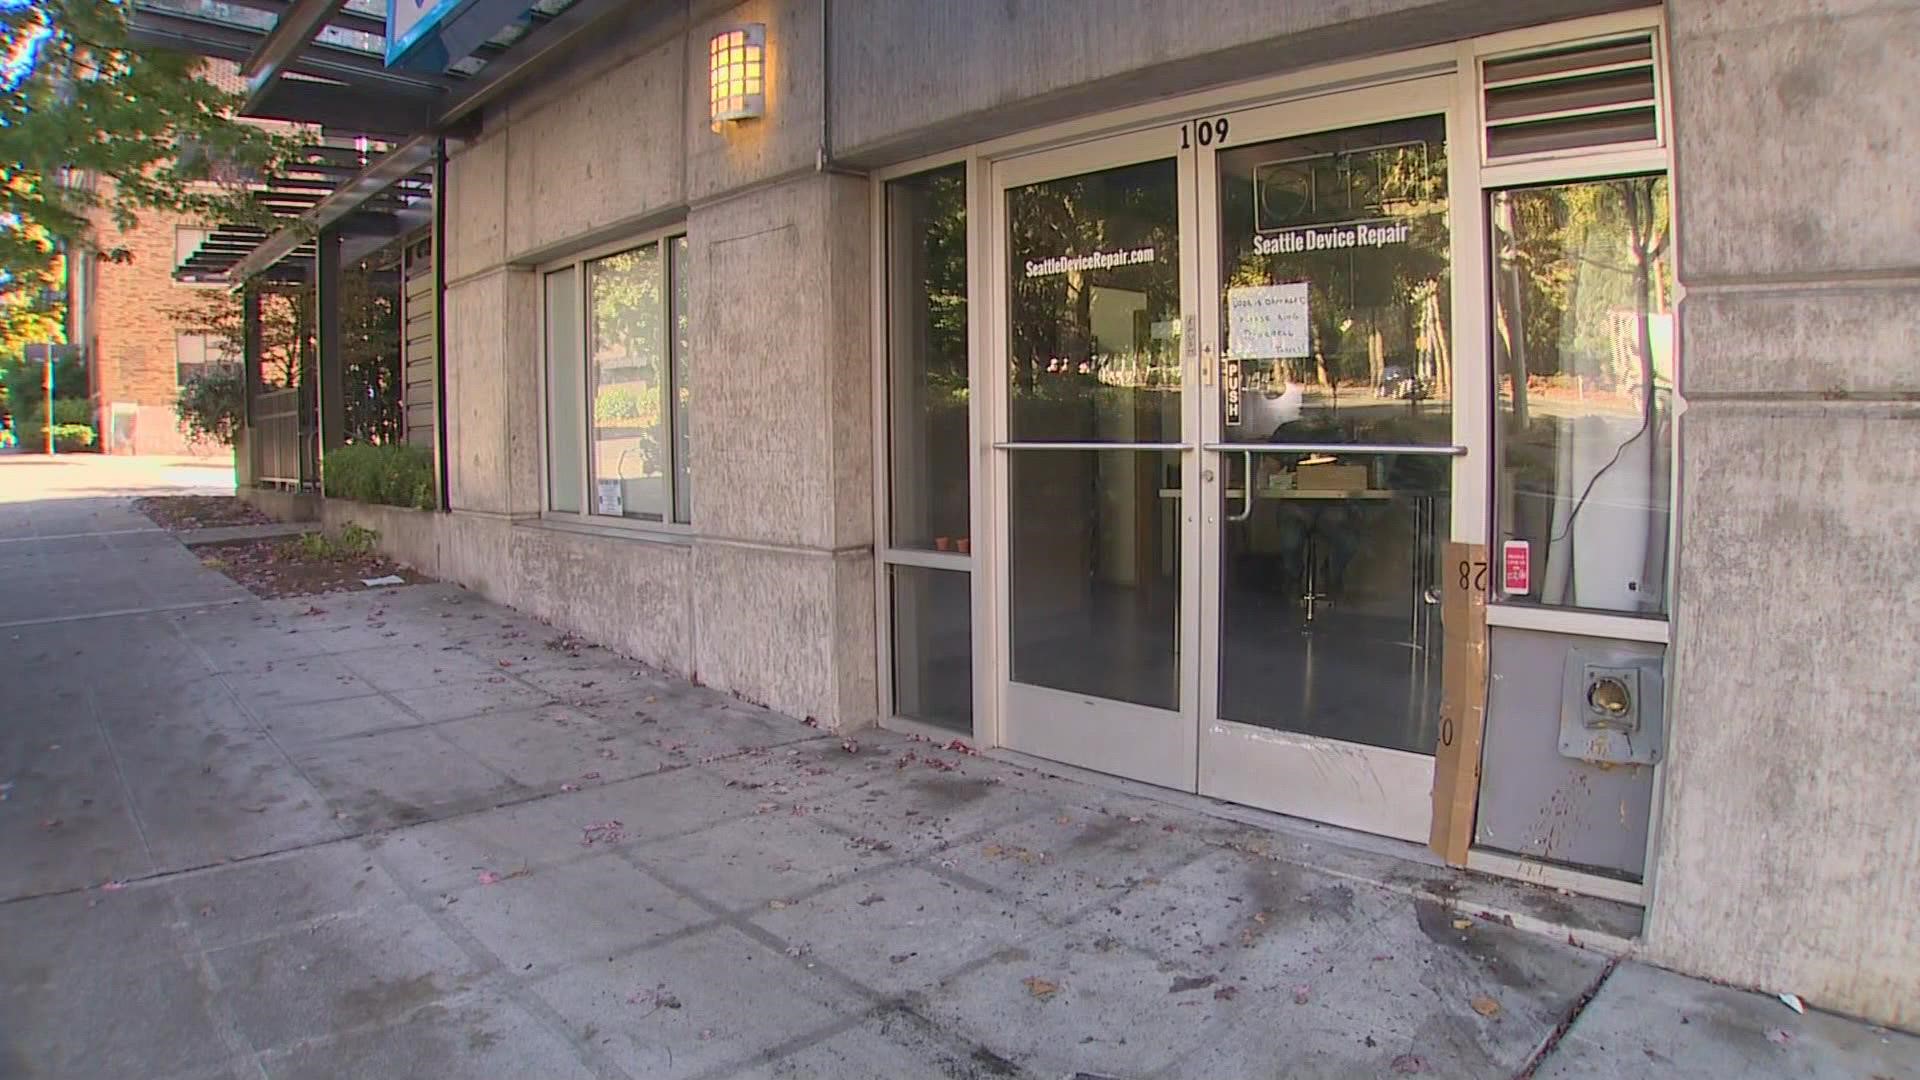 The man was arrested in Seattle's Belltown neighborhood after crashing into a business at 2nd Avenue and Denny Way.